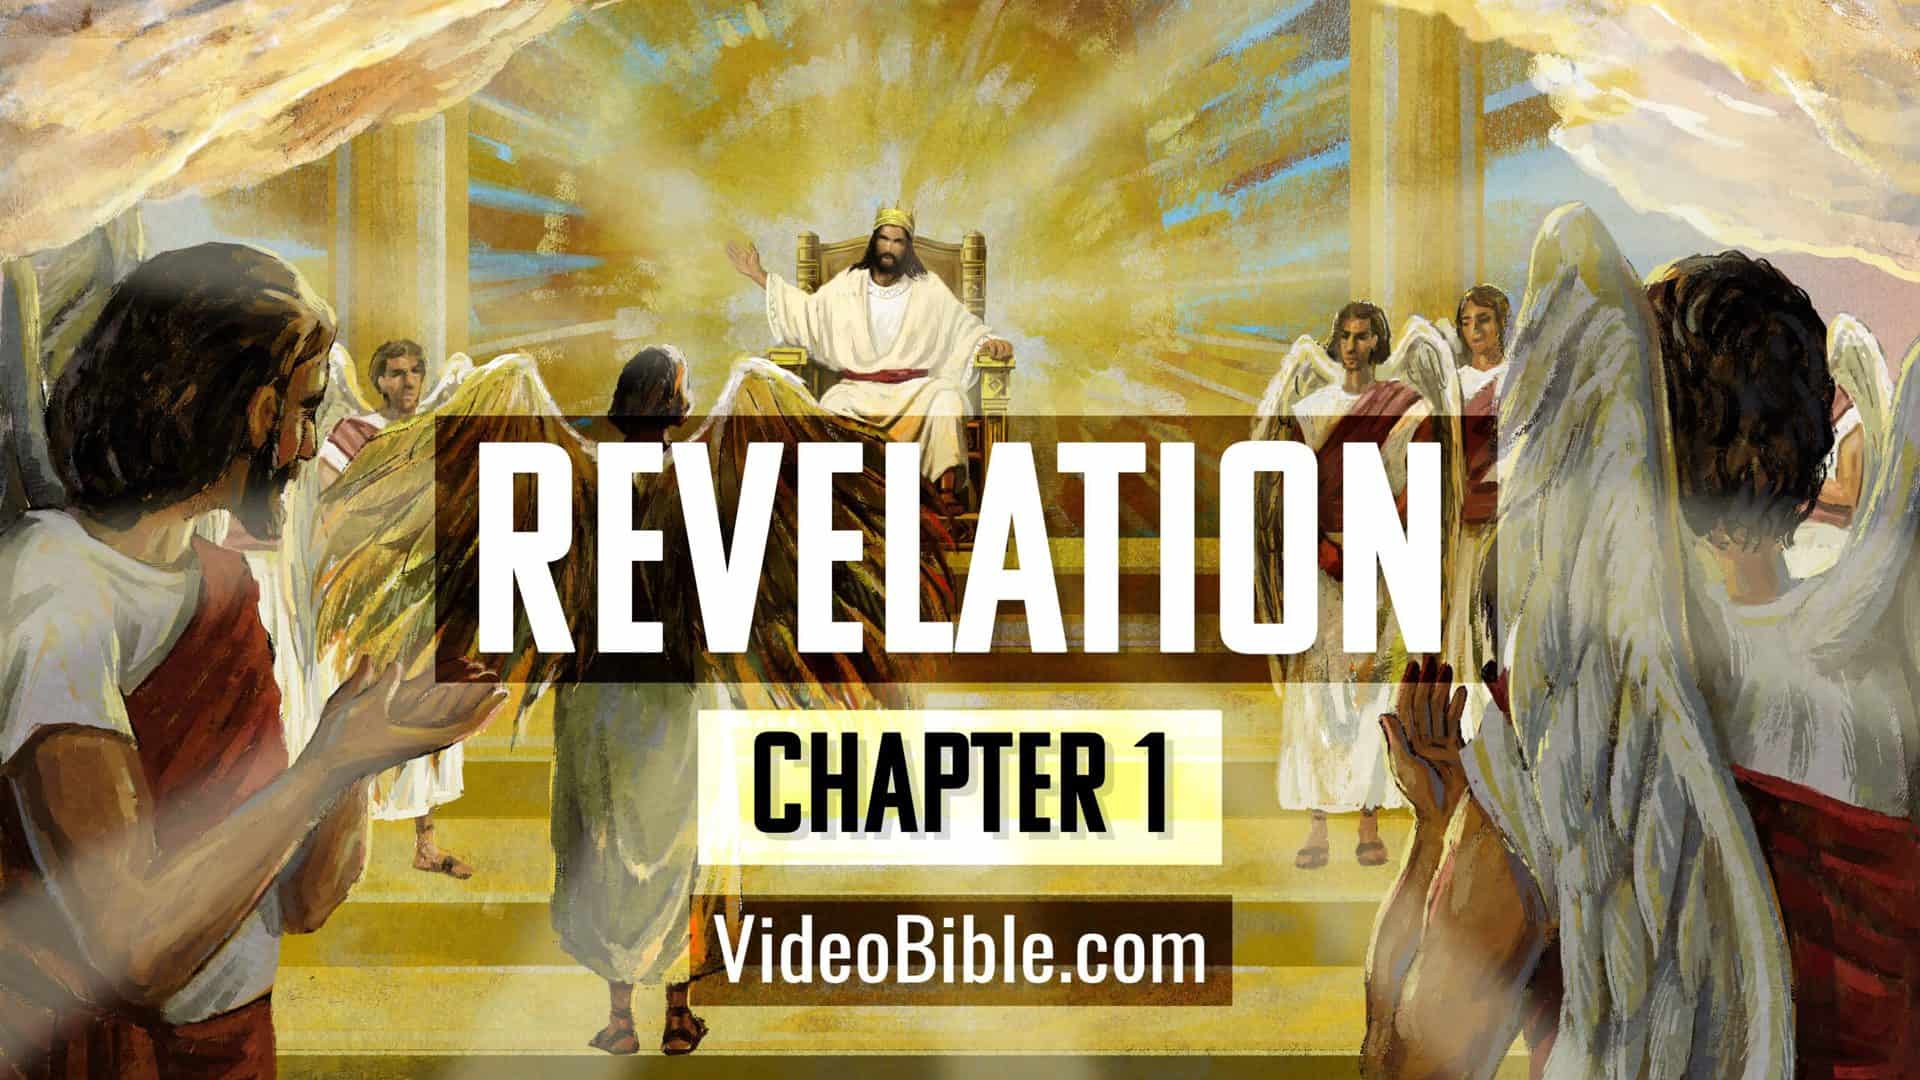 Cover image for the book of Revelation Chapter 1